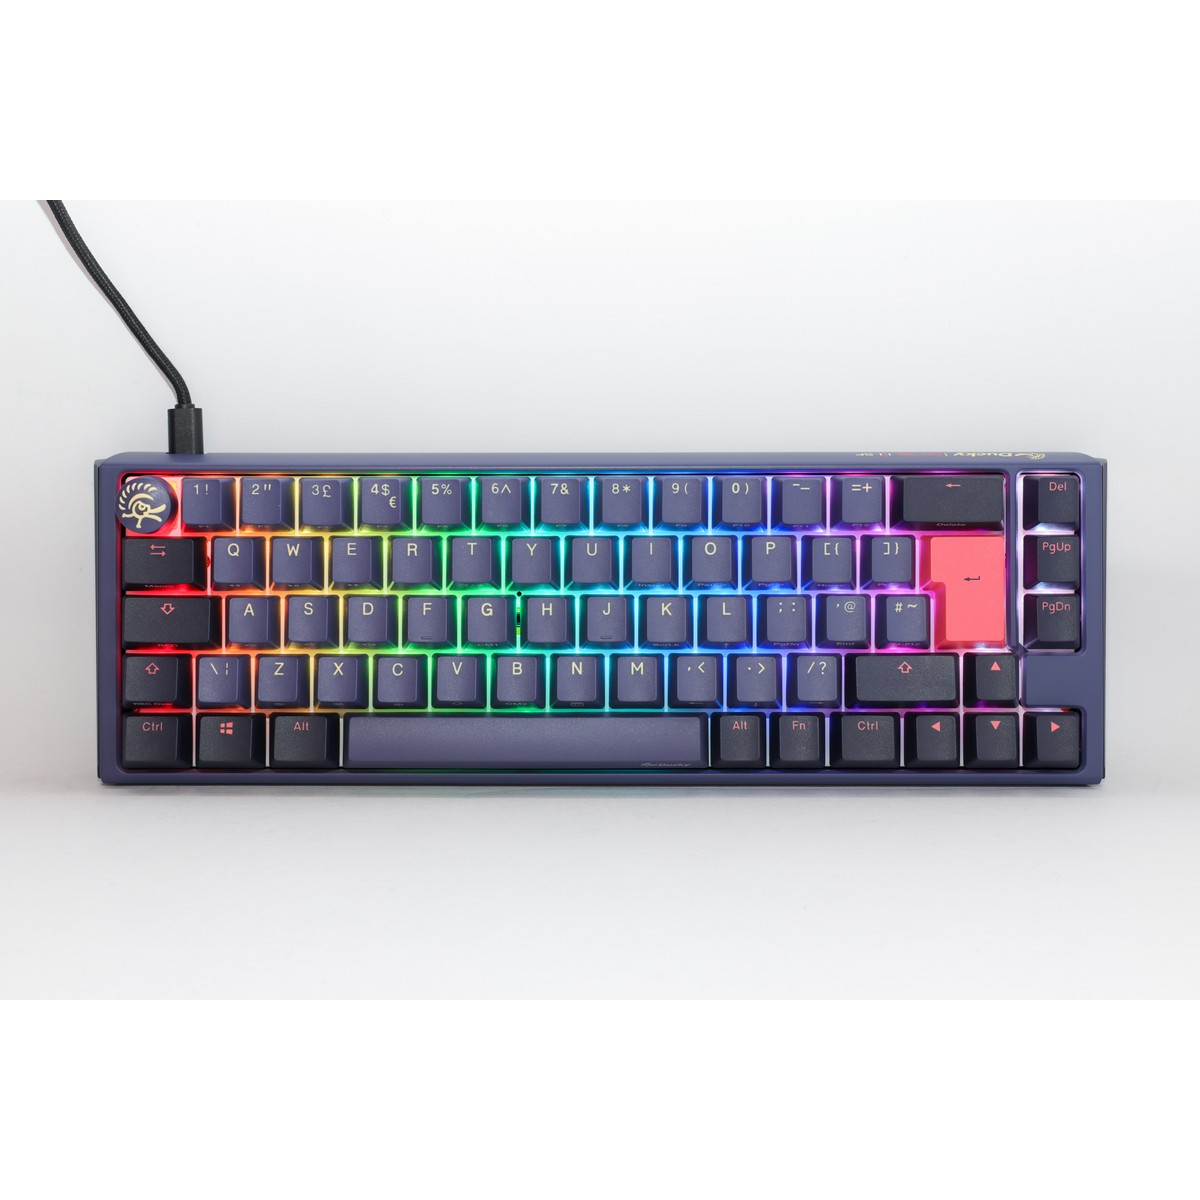 Ducky One 3 Cosmic SF 65% USB RGB Mechanical Gaming Keyboard Cherry MX Silent Red Switch - UK Layout